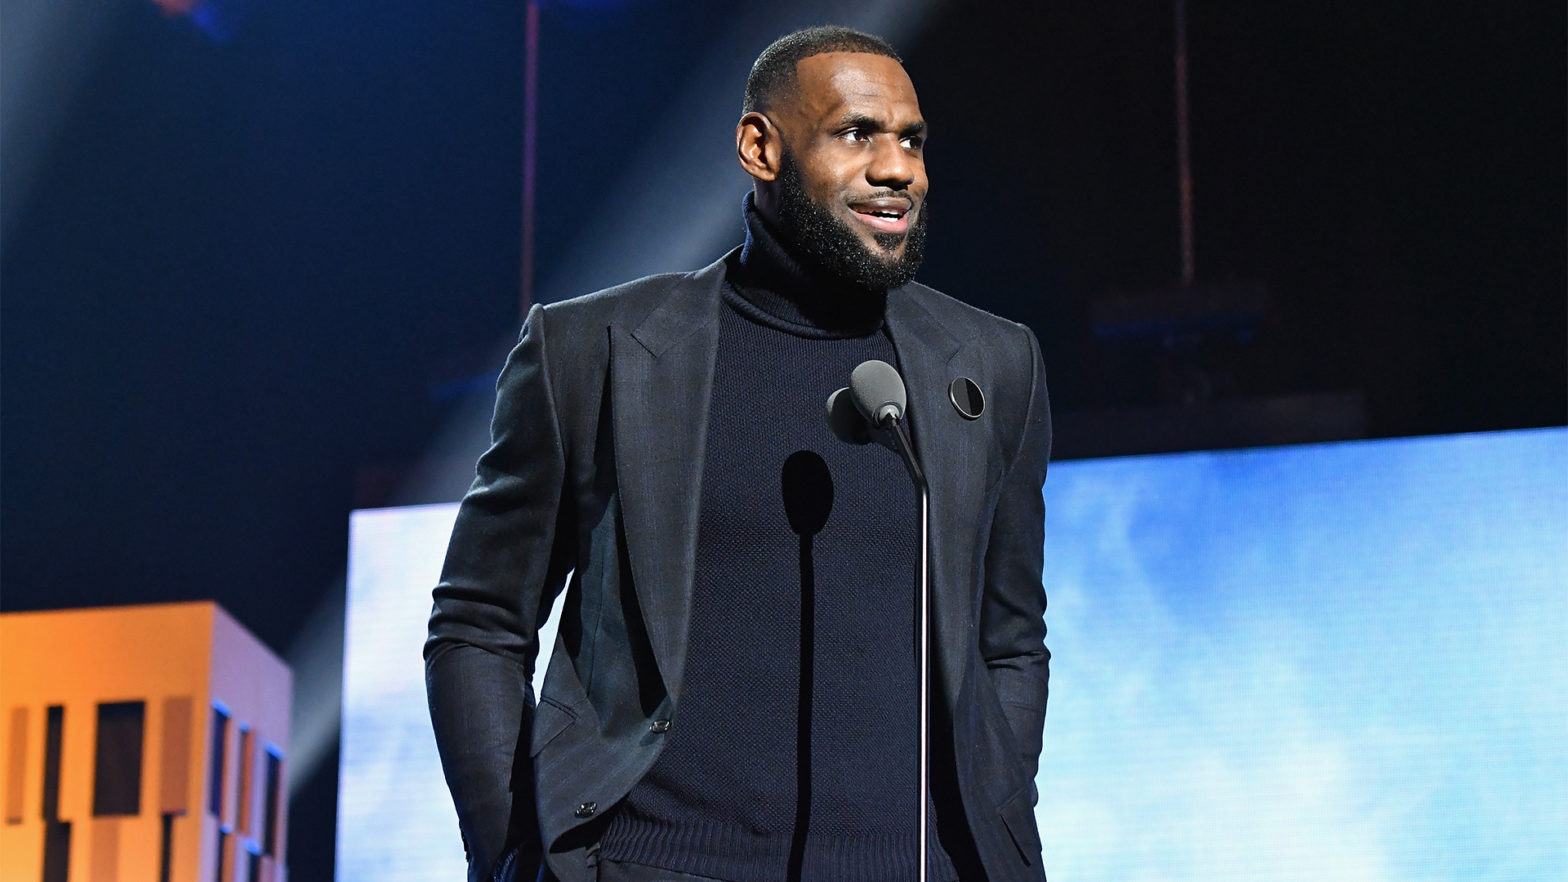 LeBron James Launches Ladder To Offer Clean Supplements For Nutritional Health And Performance